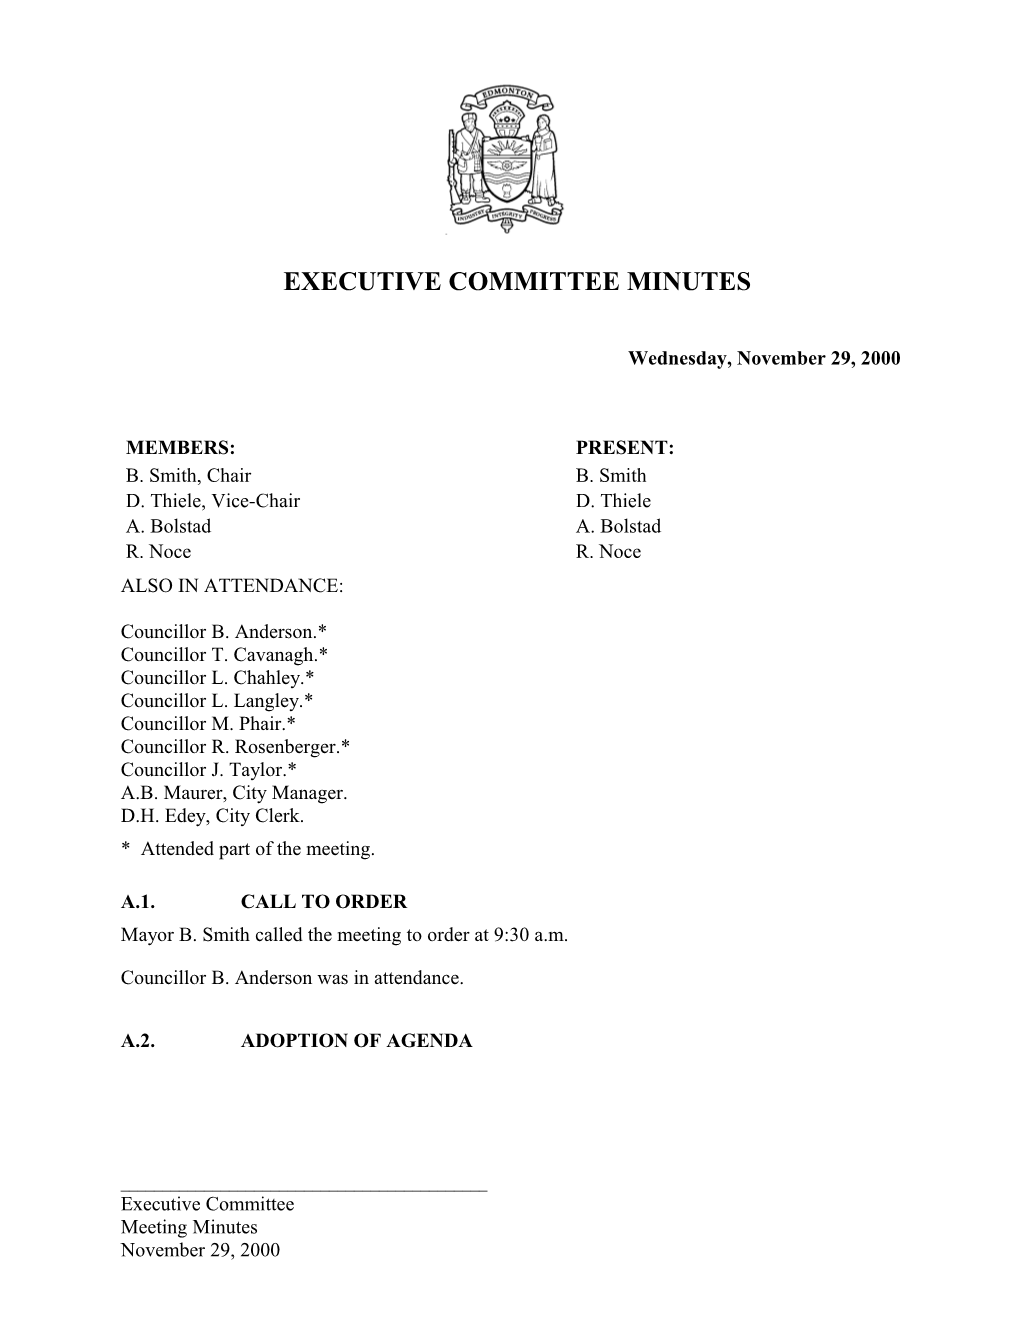 Minutes for Executive Committee November 29, 2000 Meeting